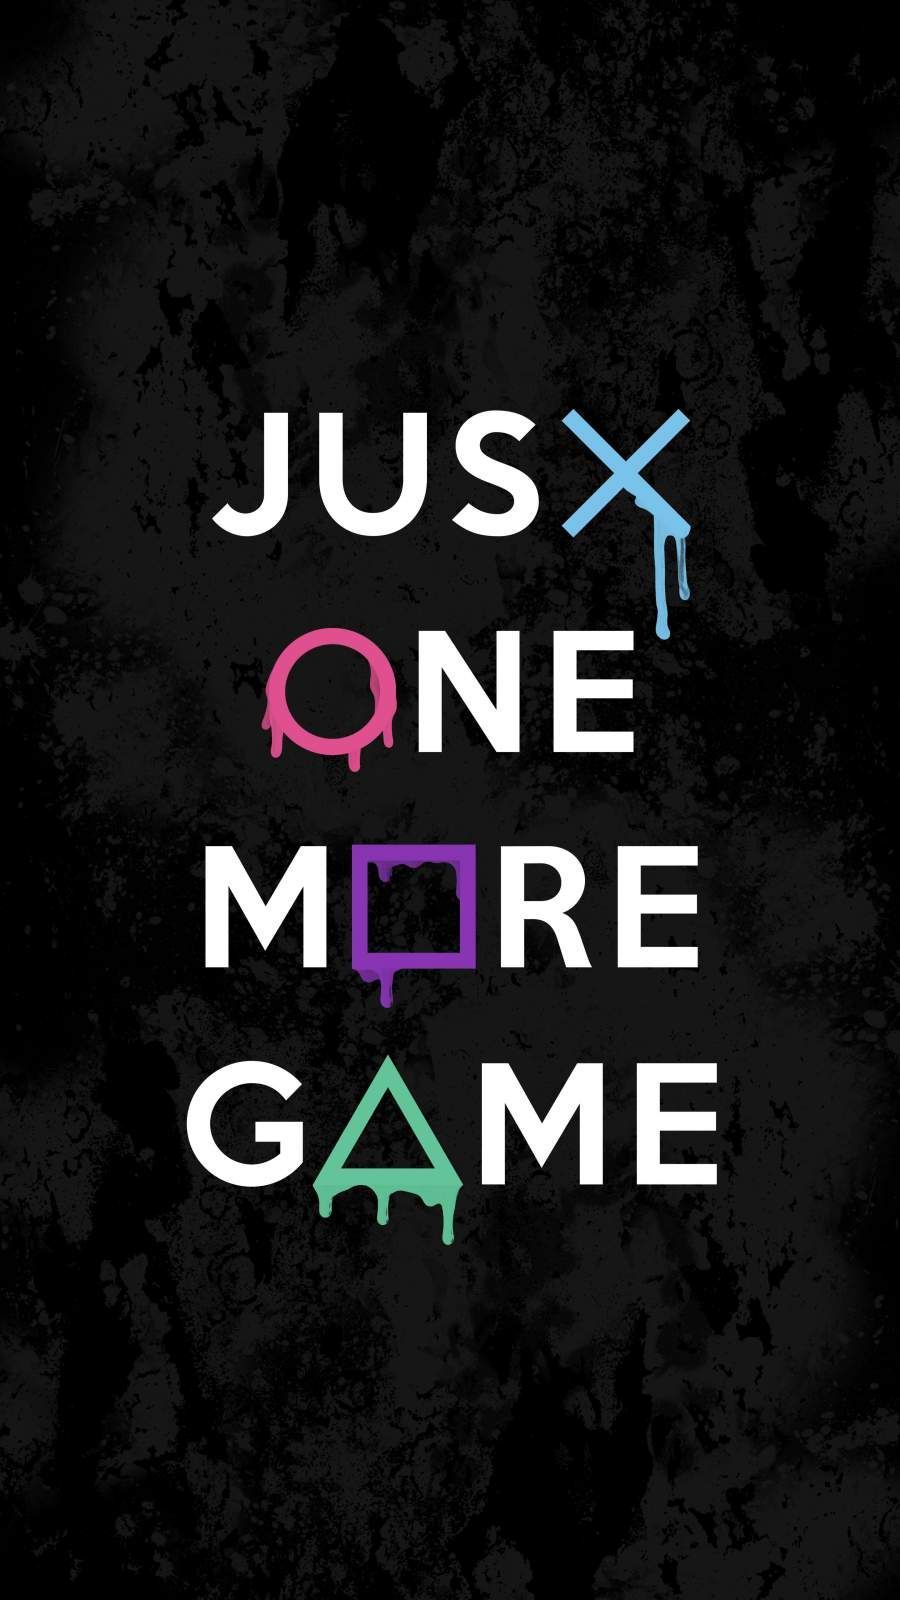 Just One More Game iPhone Wallpaper. Game wallpaper iphone, Gamer quotes, Gaming wallpaper